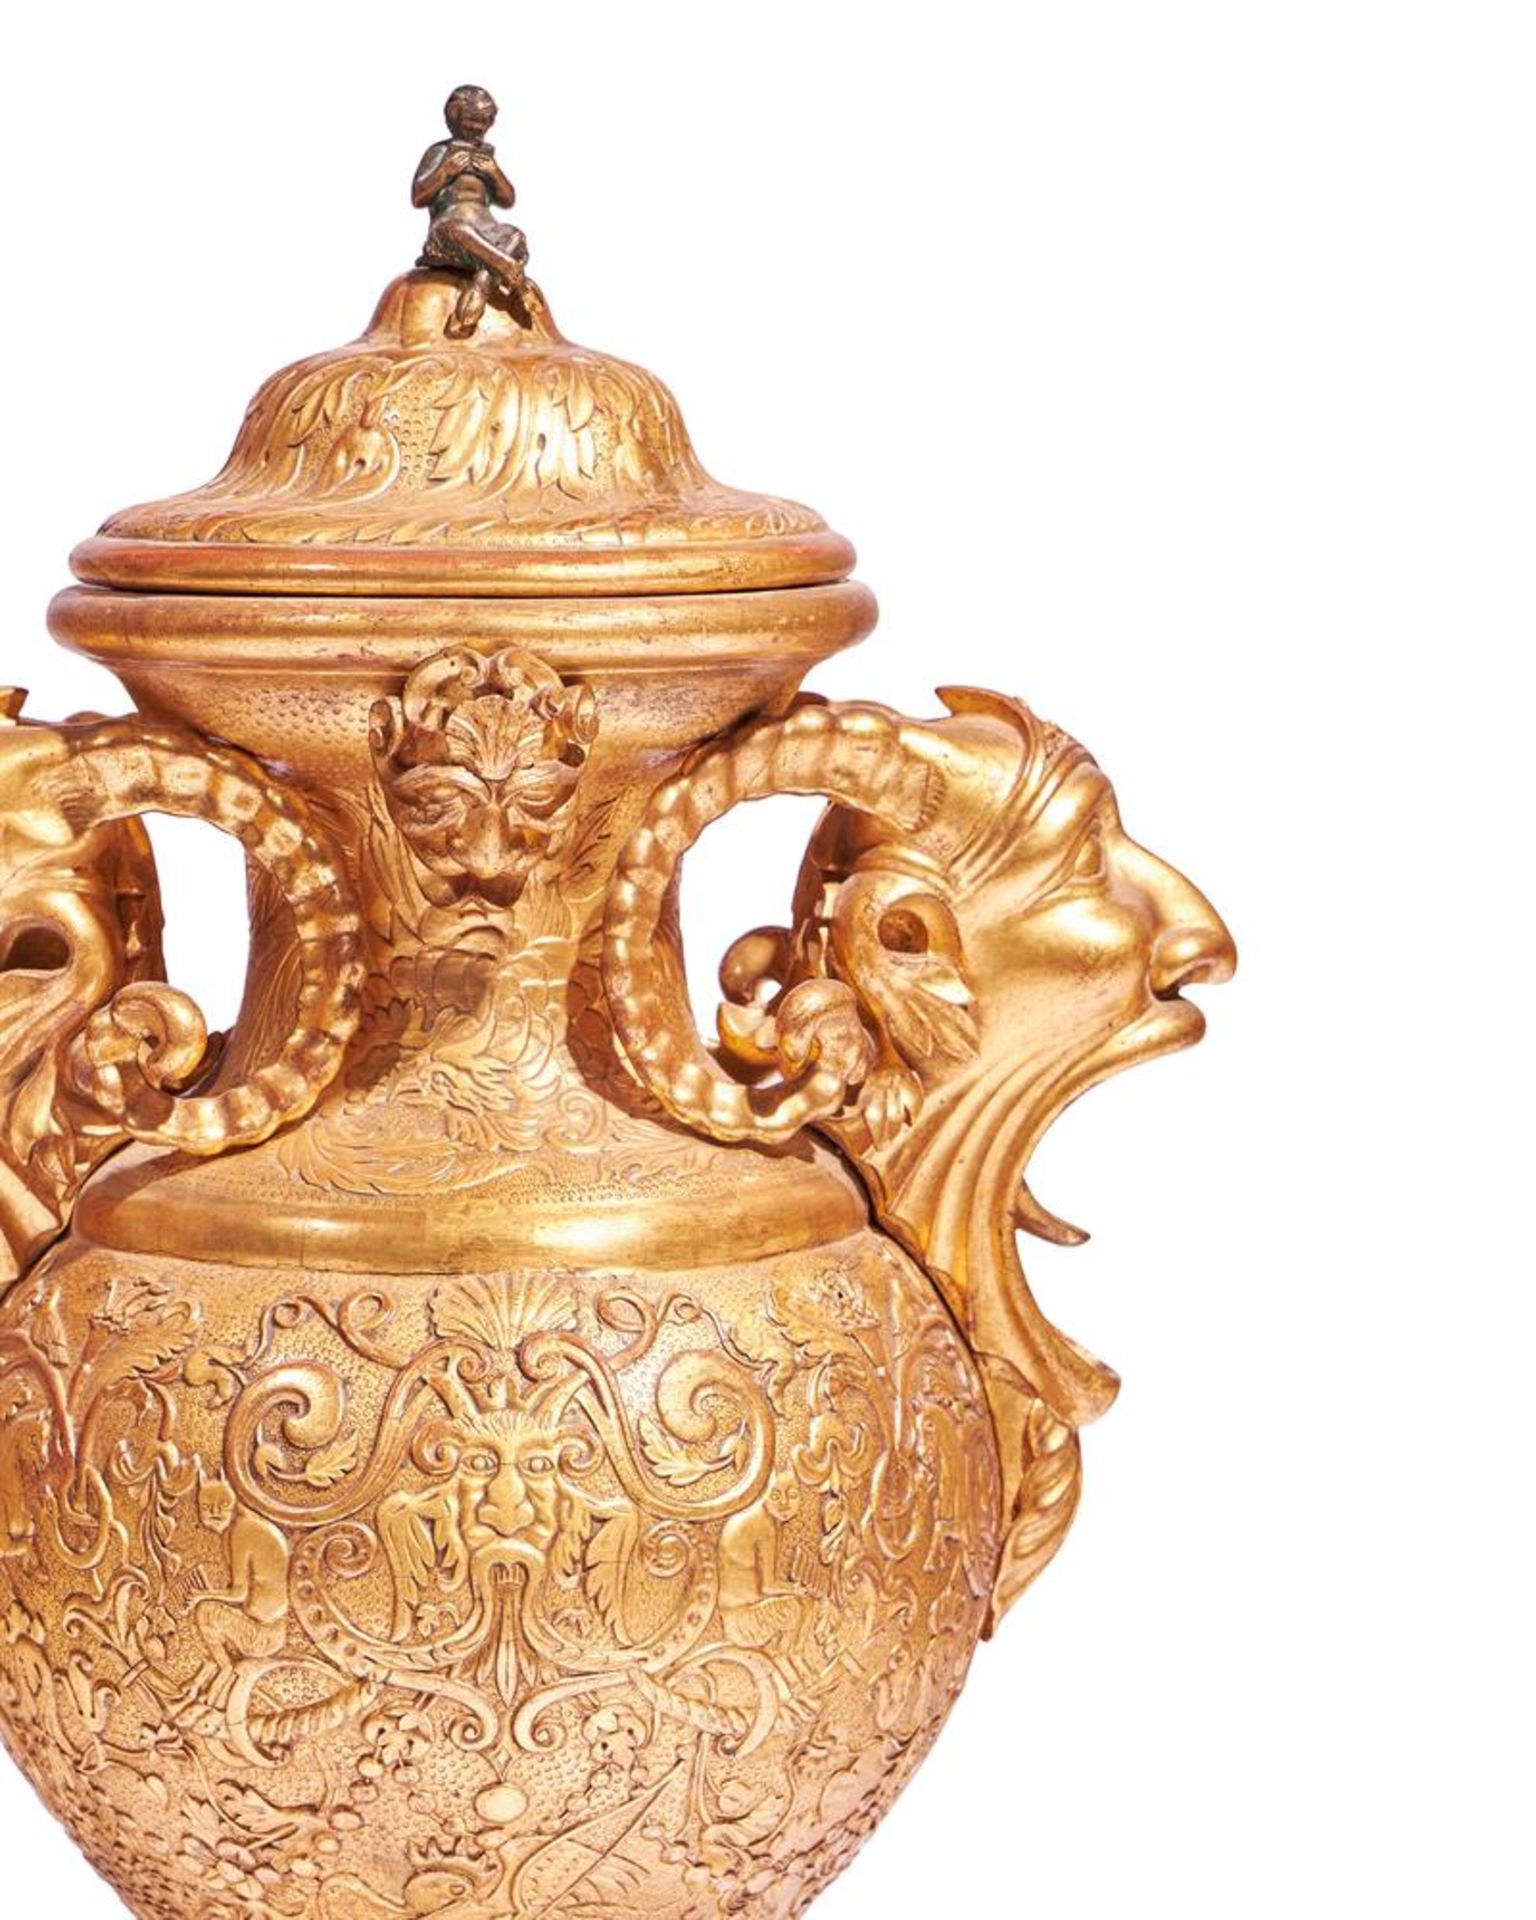 A PAIR OF ITALIAN NEOCLASSICAL GILTWOOD VASES, FLORENCE, SECOND HALF 19TH CENTURY - Image 4 of 5